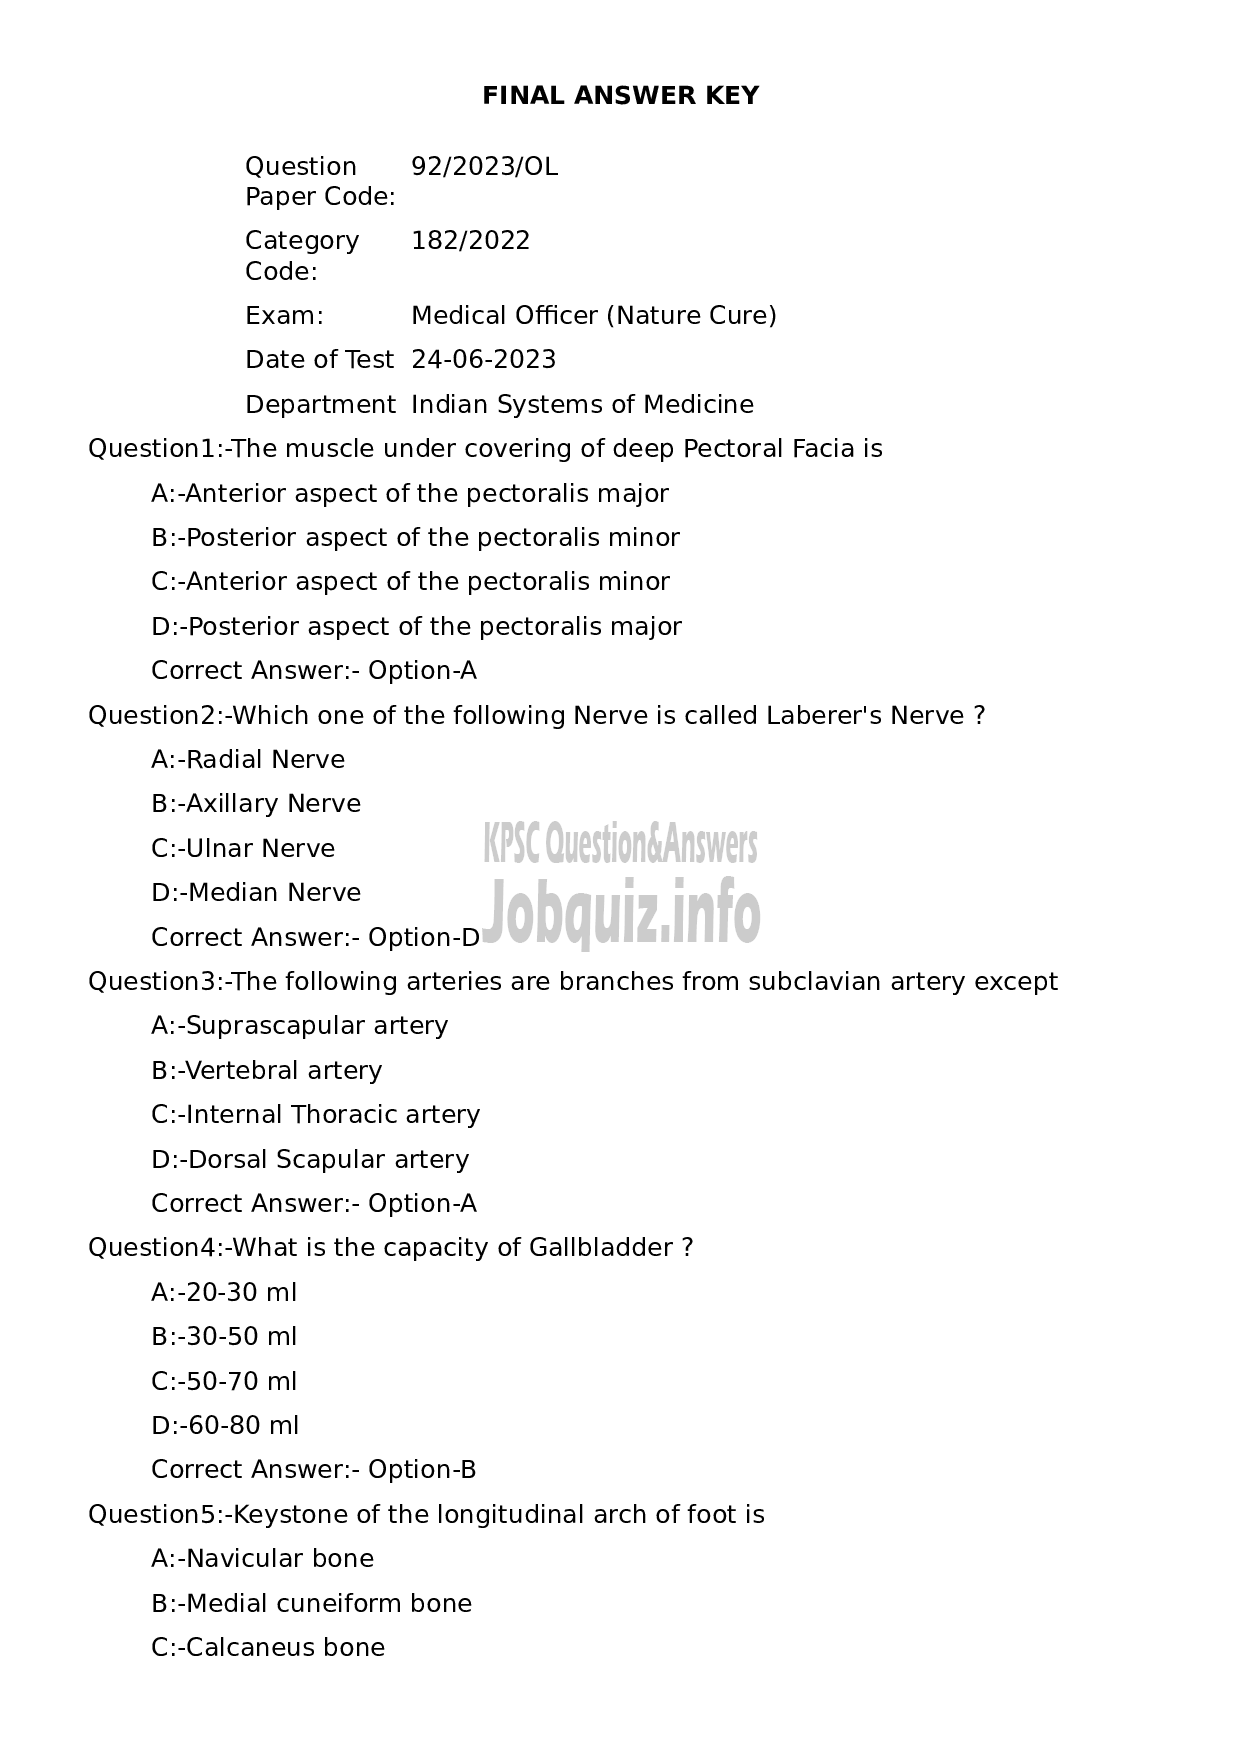 Kerala PSC Question Paper - Medical Officer (Nature Cure)-1